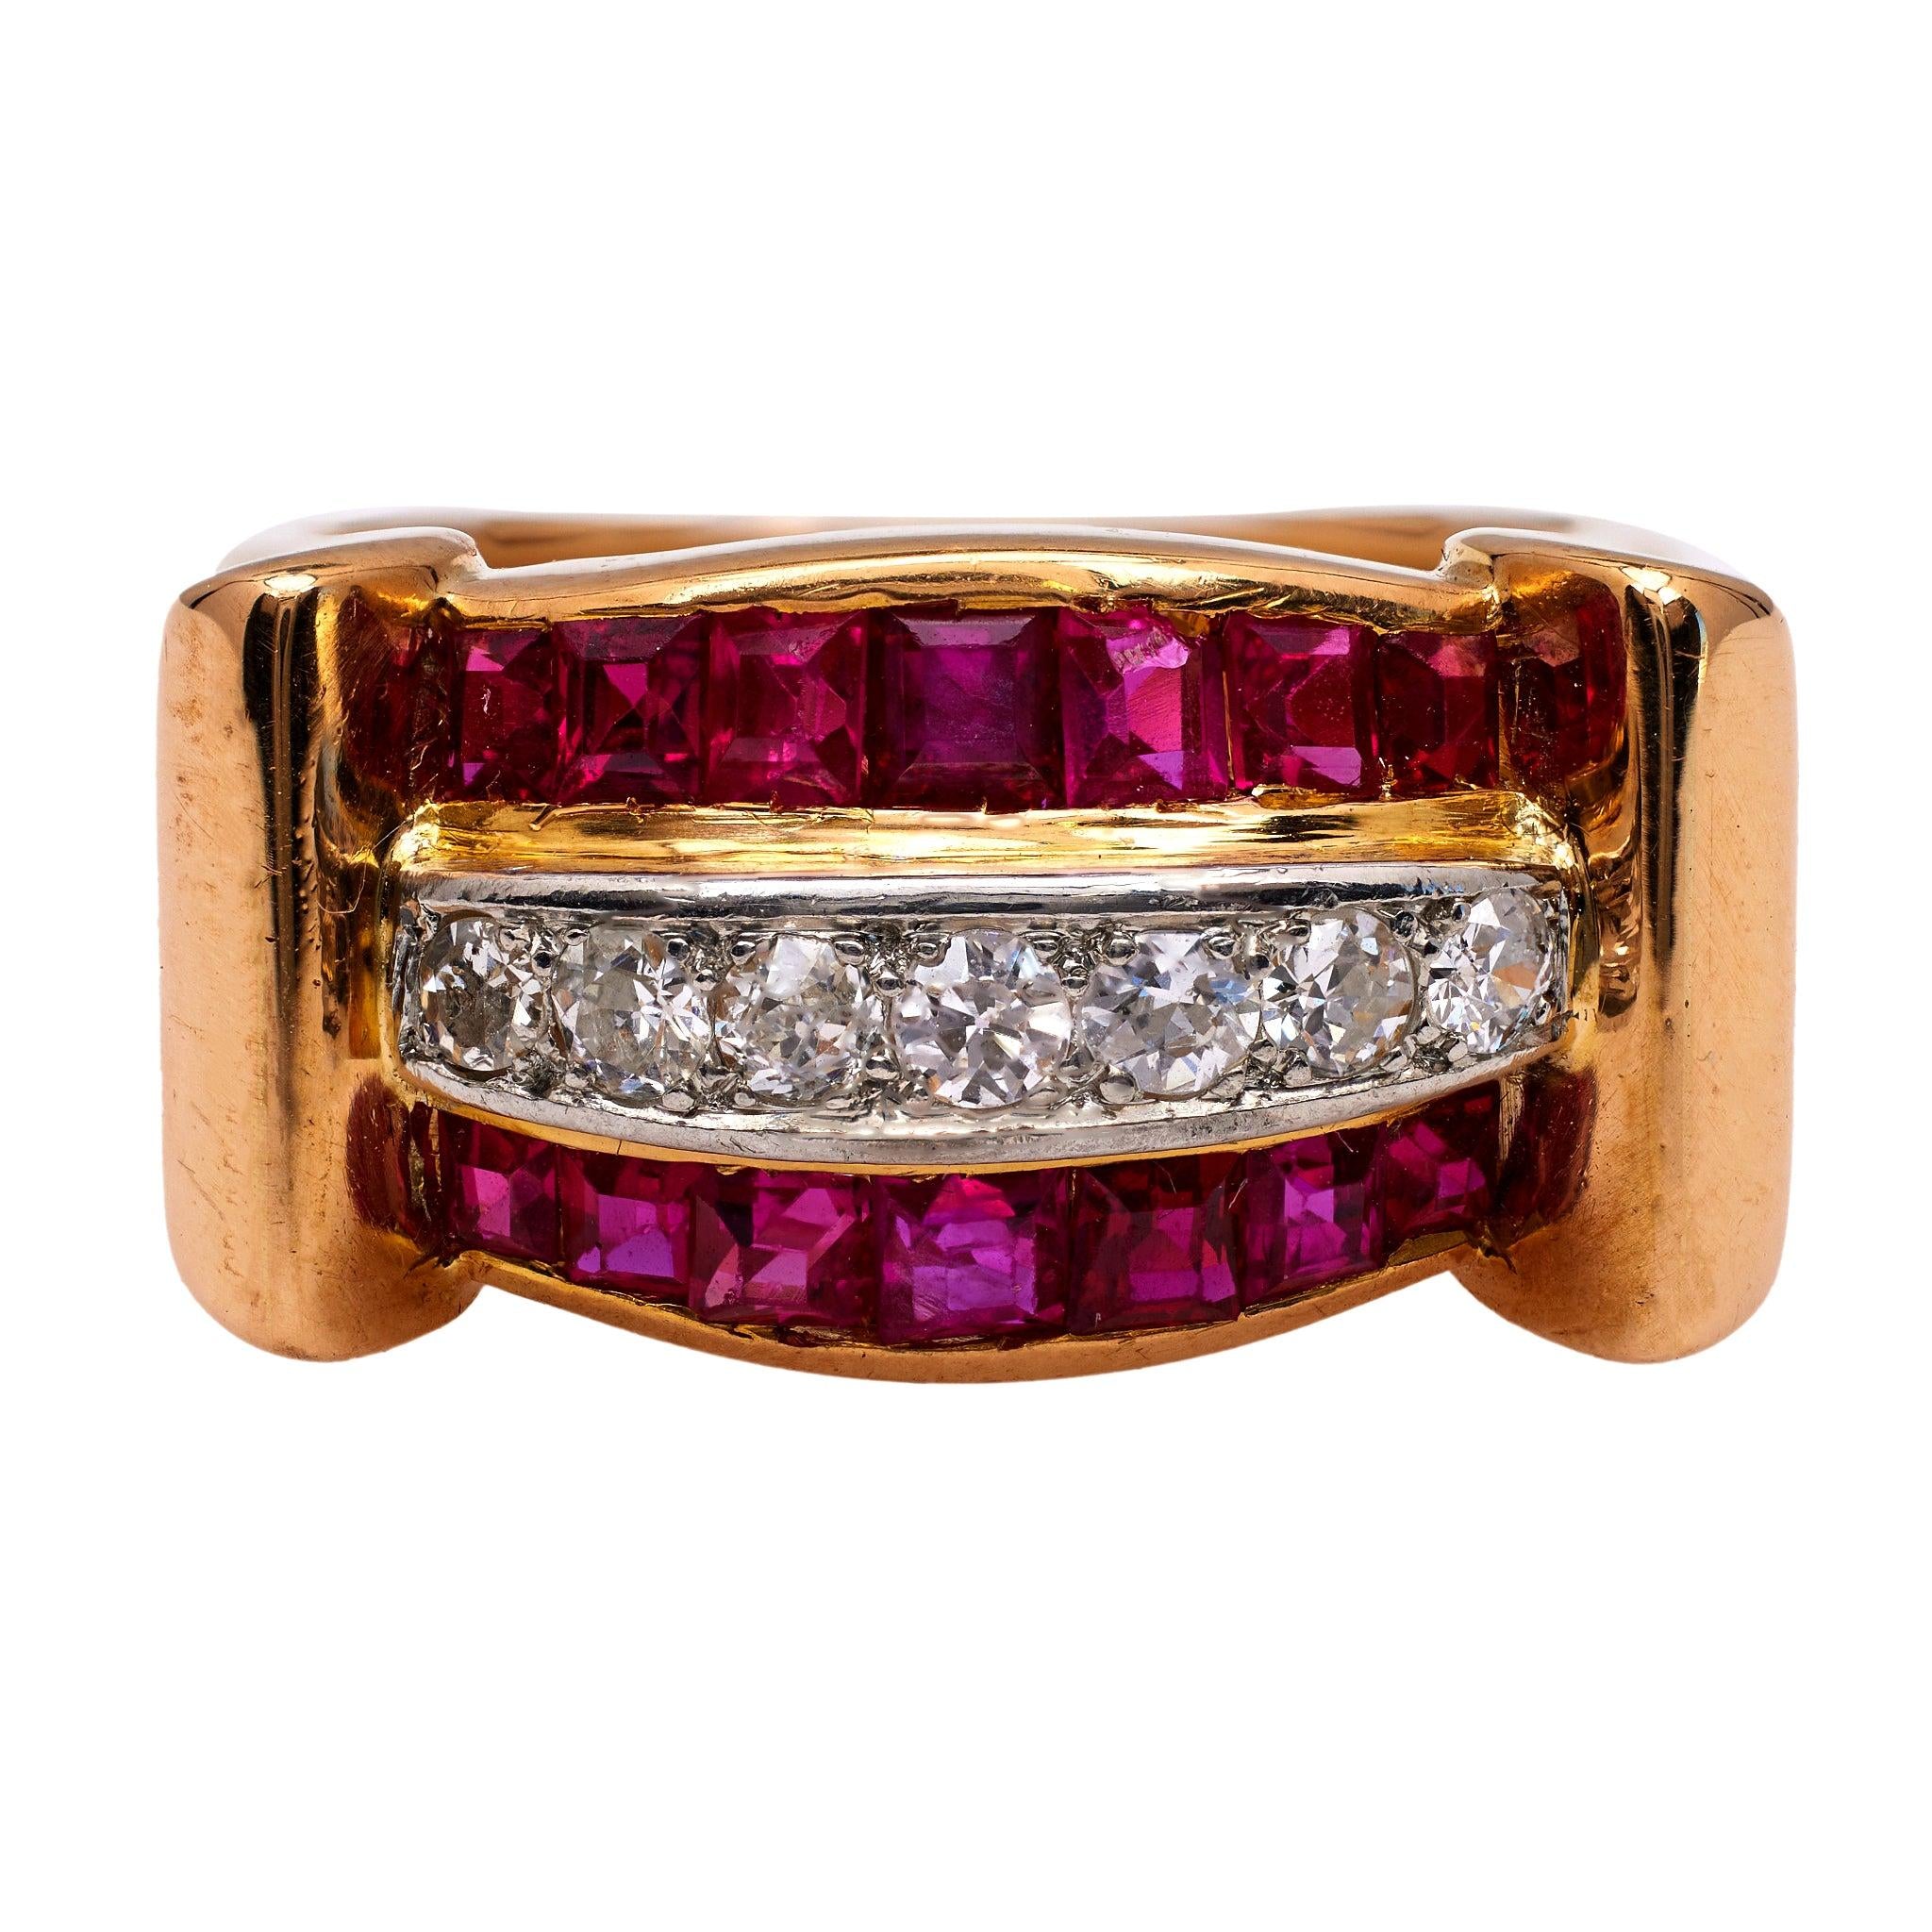 Retro French Diamond and Synthetic Ruby 18k Yellow Gold Tank Ring  Jack Weir & Sons   